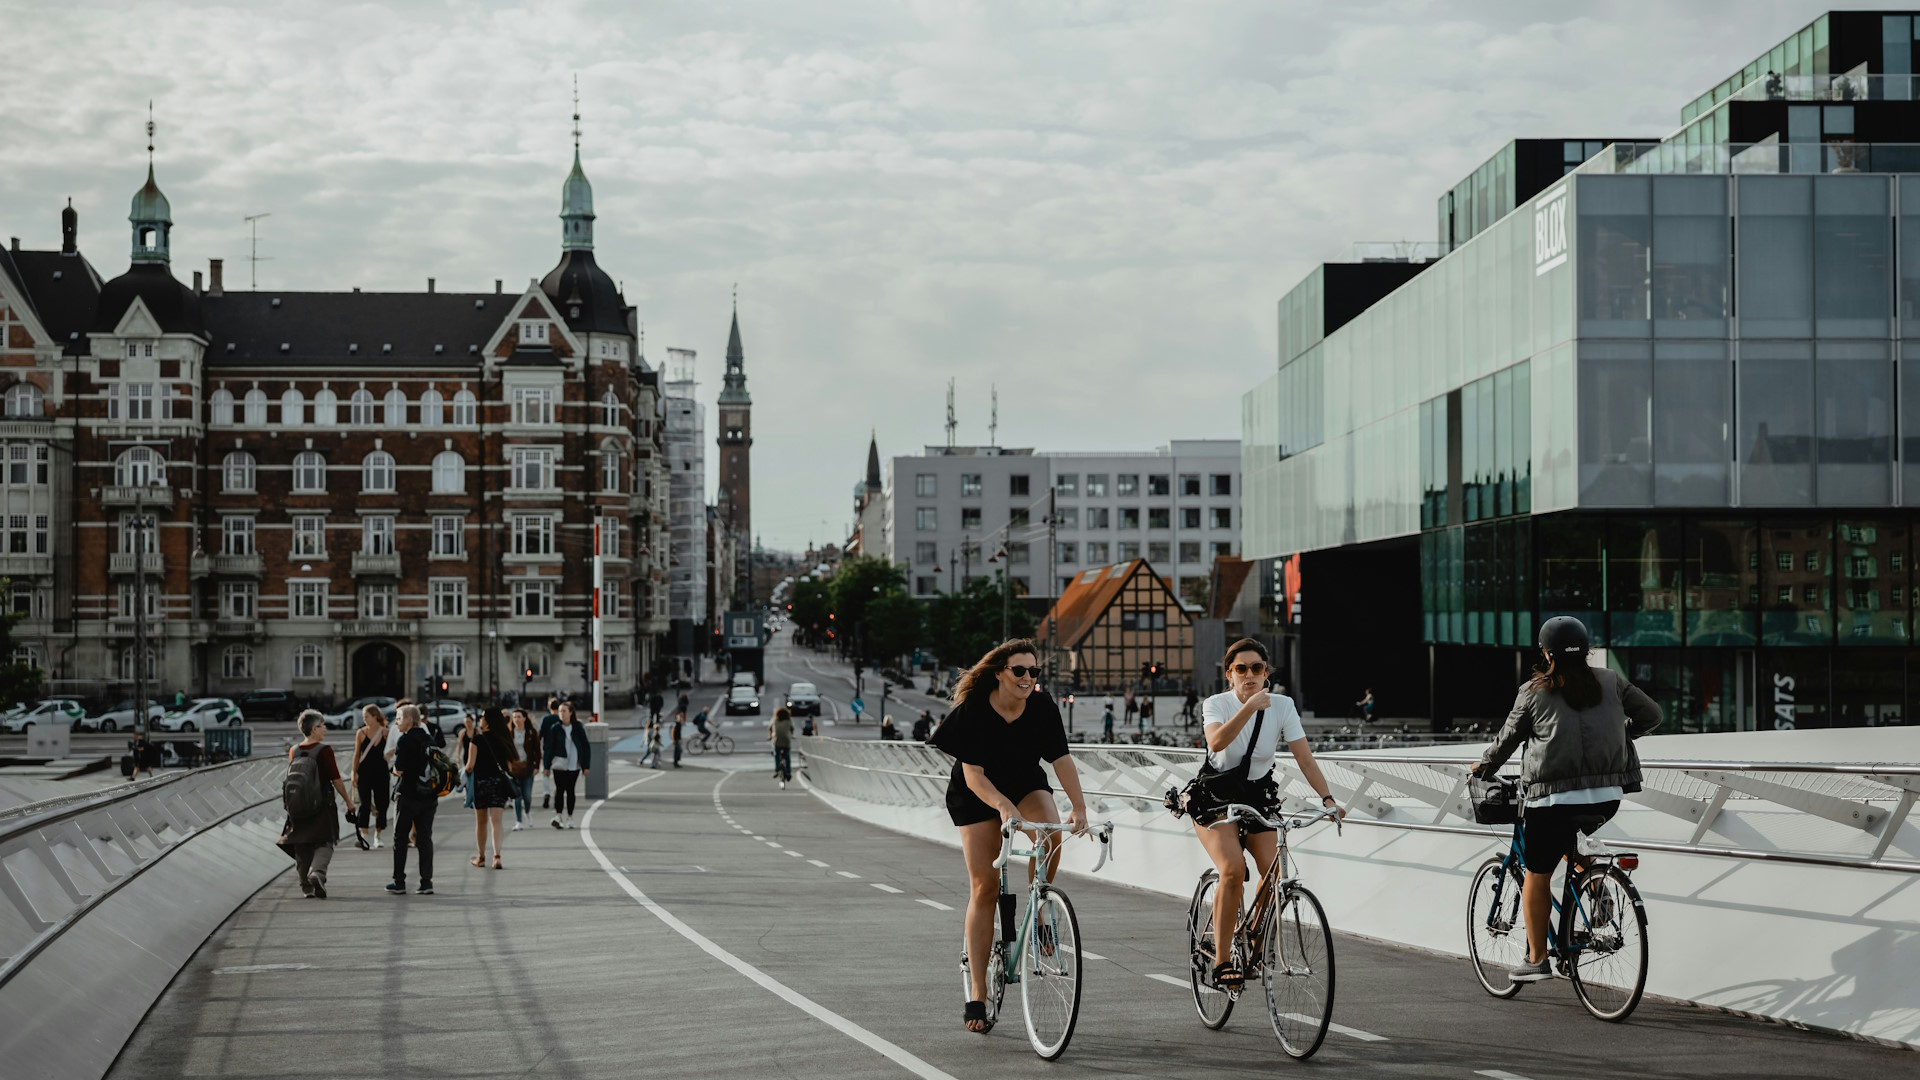 Photo of 2 cyclists in the streets of Copenhagen, capital of Denmark